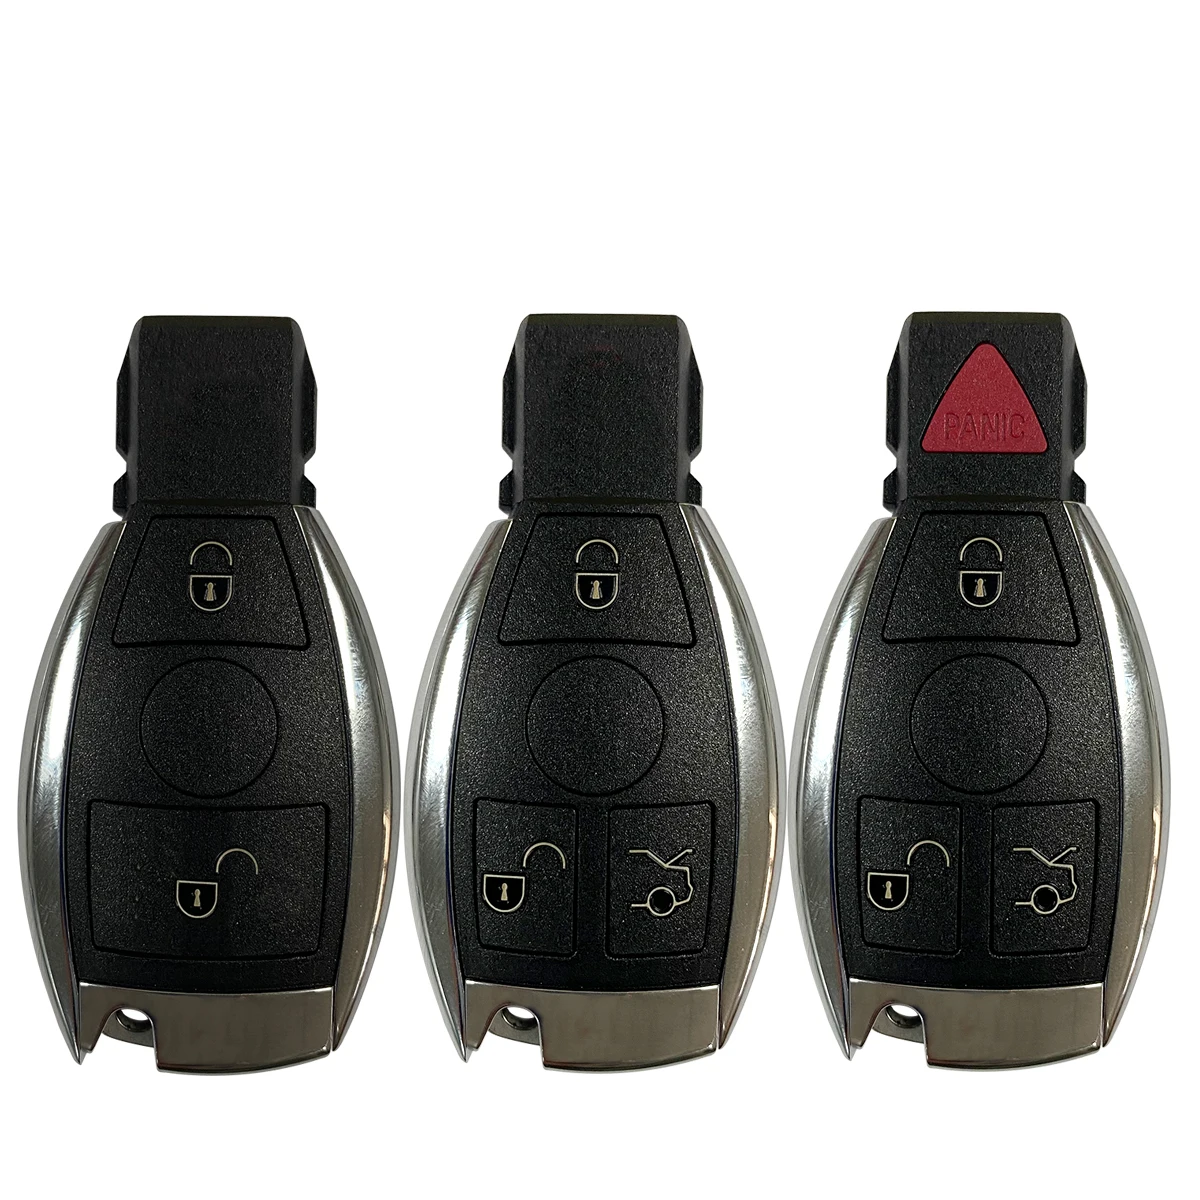 Okey Remote Control Car Key Shell Replacement  For Mercedes Benz Year 2000+ C E S Class Supports Original NEC/BGA  2/3/4 Buttons okey smart control car key remote for mercedes benz year 2000 c e s class supports original nec bga 315 433mhz 2 3 4 buttons